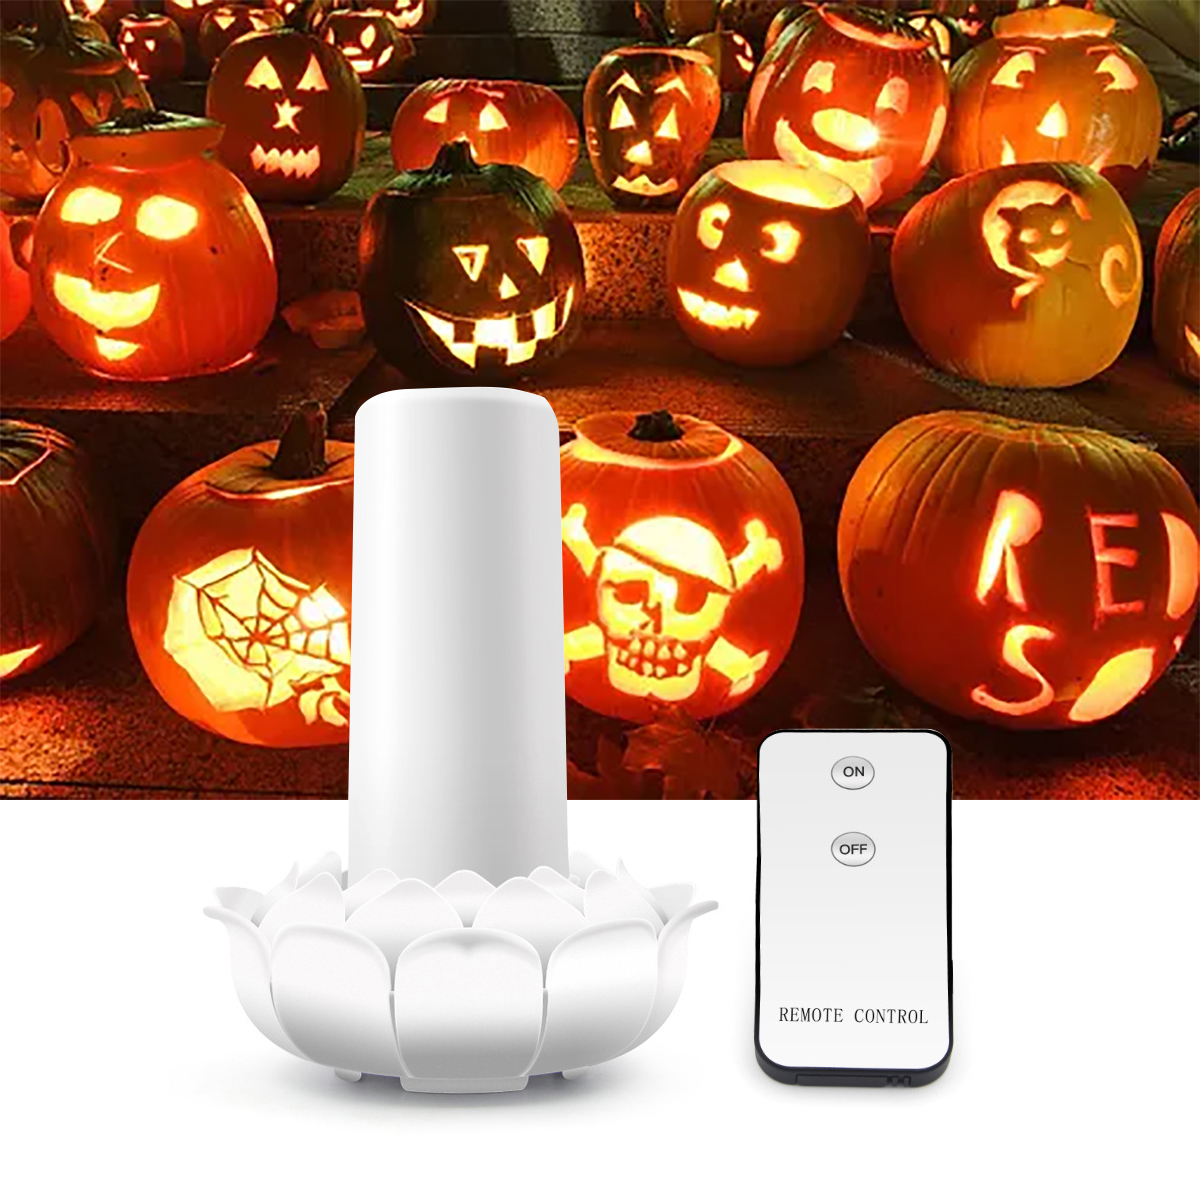 

Remote Control Battery Powered 2 Modes Lotus Flower 102LED Flickering Flameless Halloween Candle Night Light